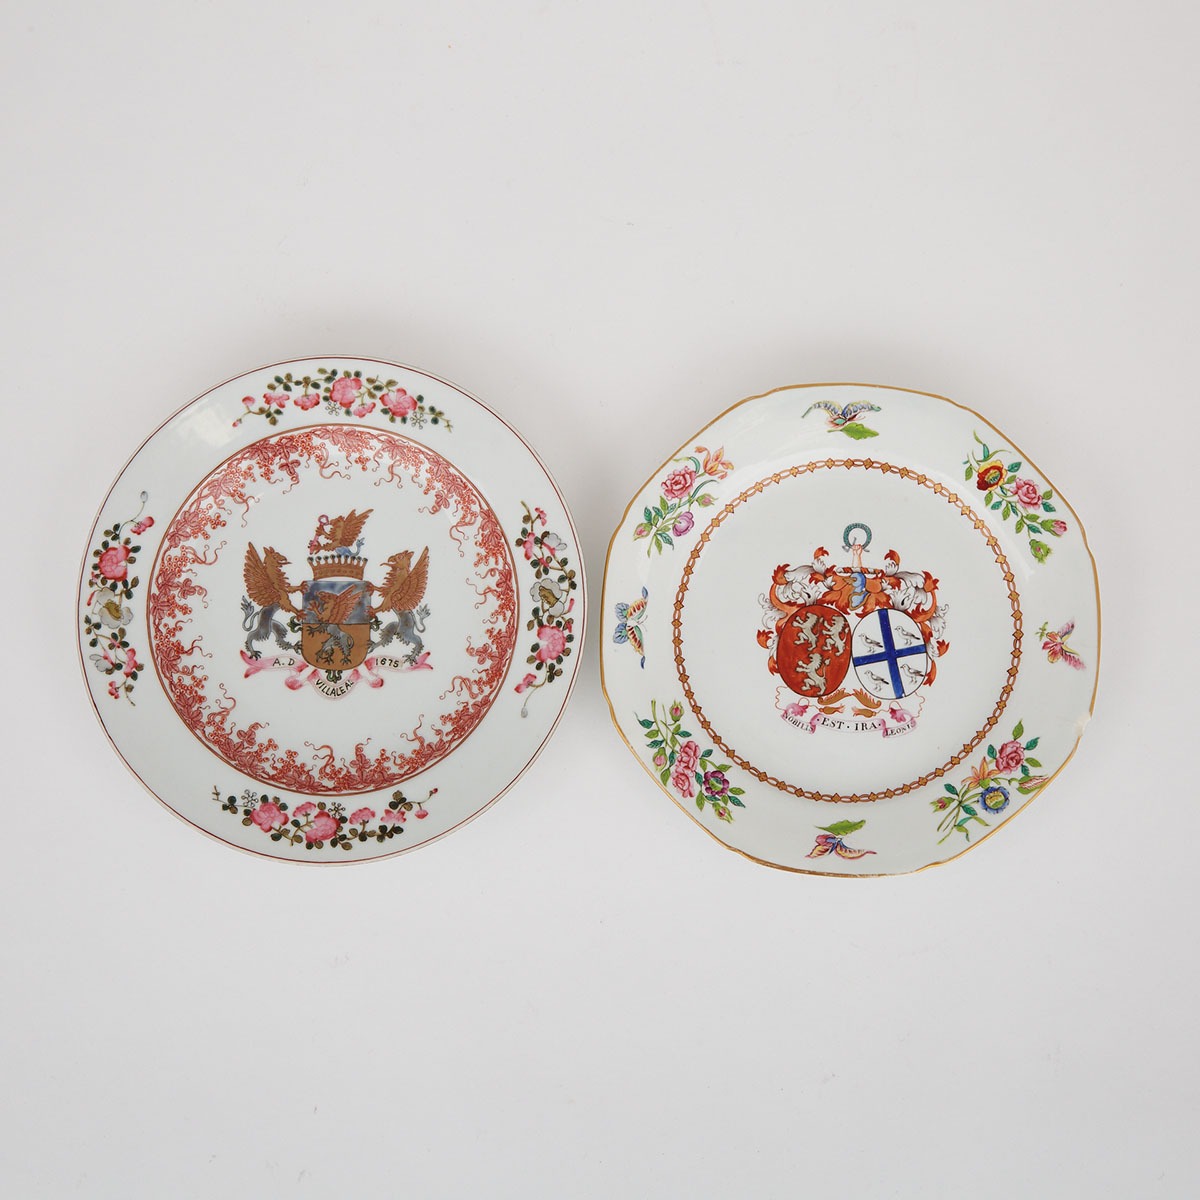 Two Chinese Export Style Armorial Plates, probably Samson, late 19th century